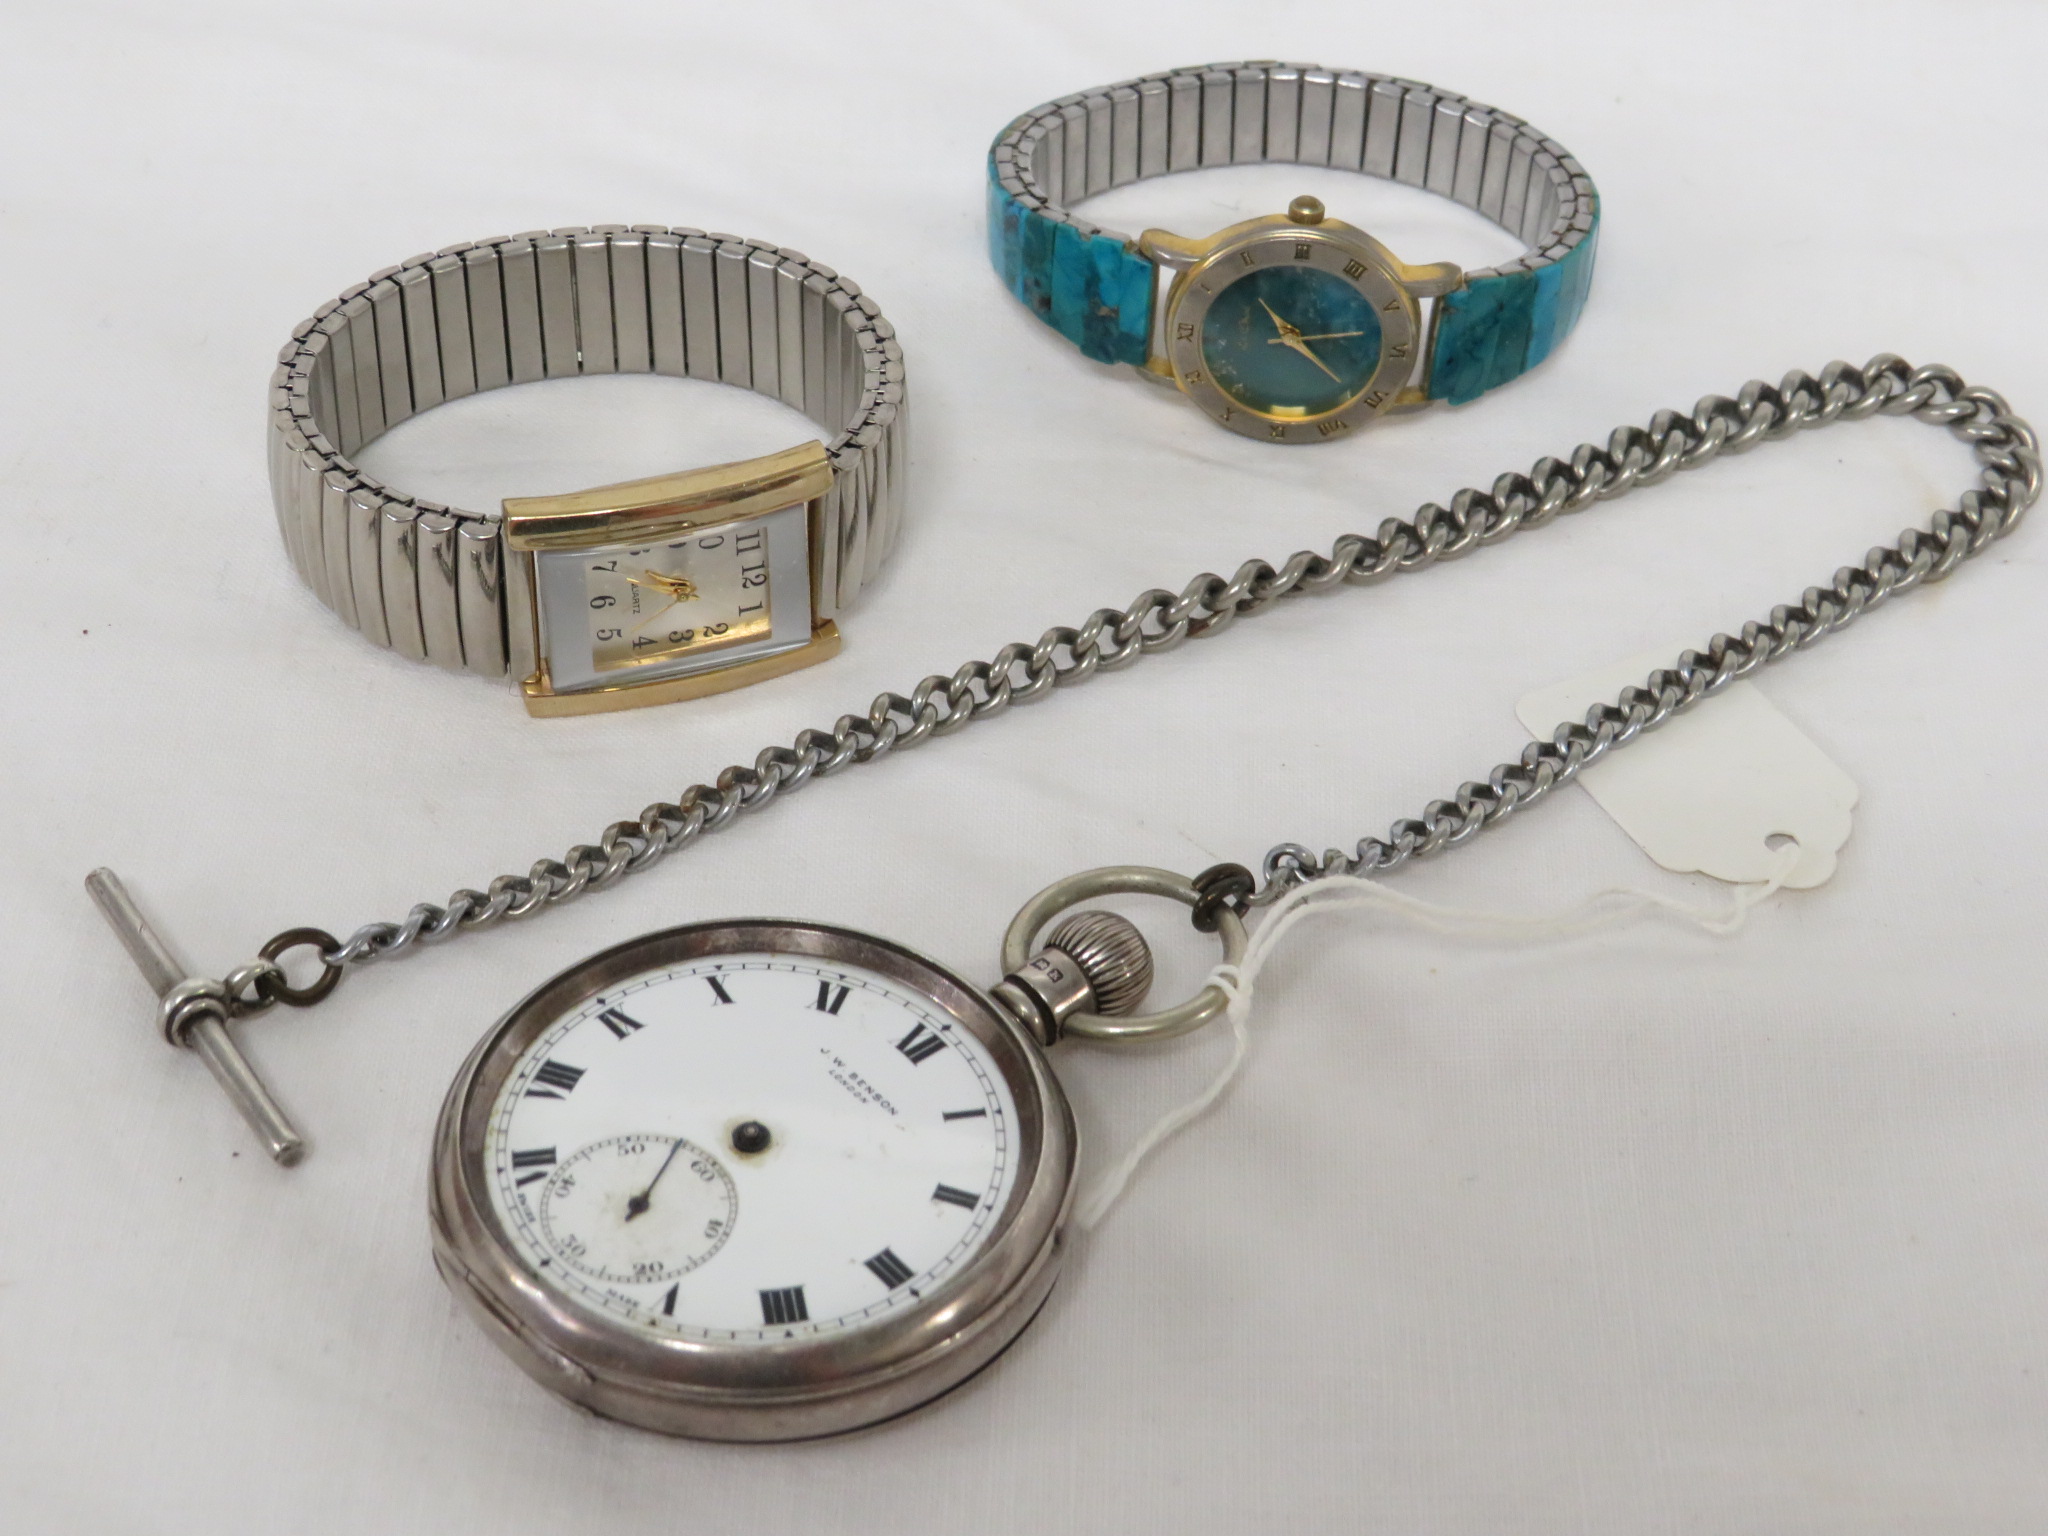 J W BENSON SILVER OPEN FACE POCKET WATCH (A/F) WITH A SILVER WATCH CHAIN, TOGETHER WITH A LE CHAT